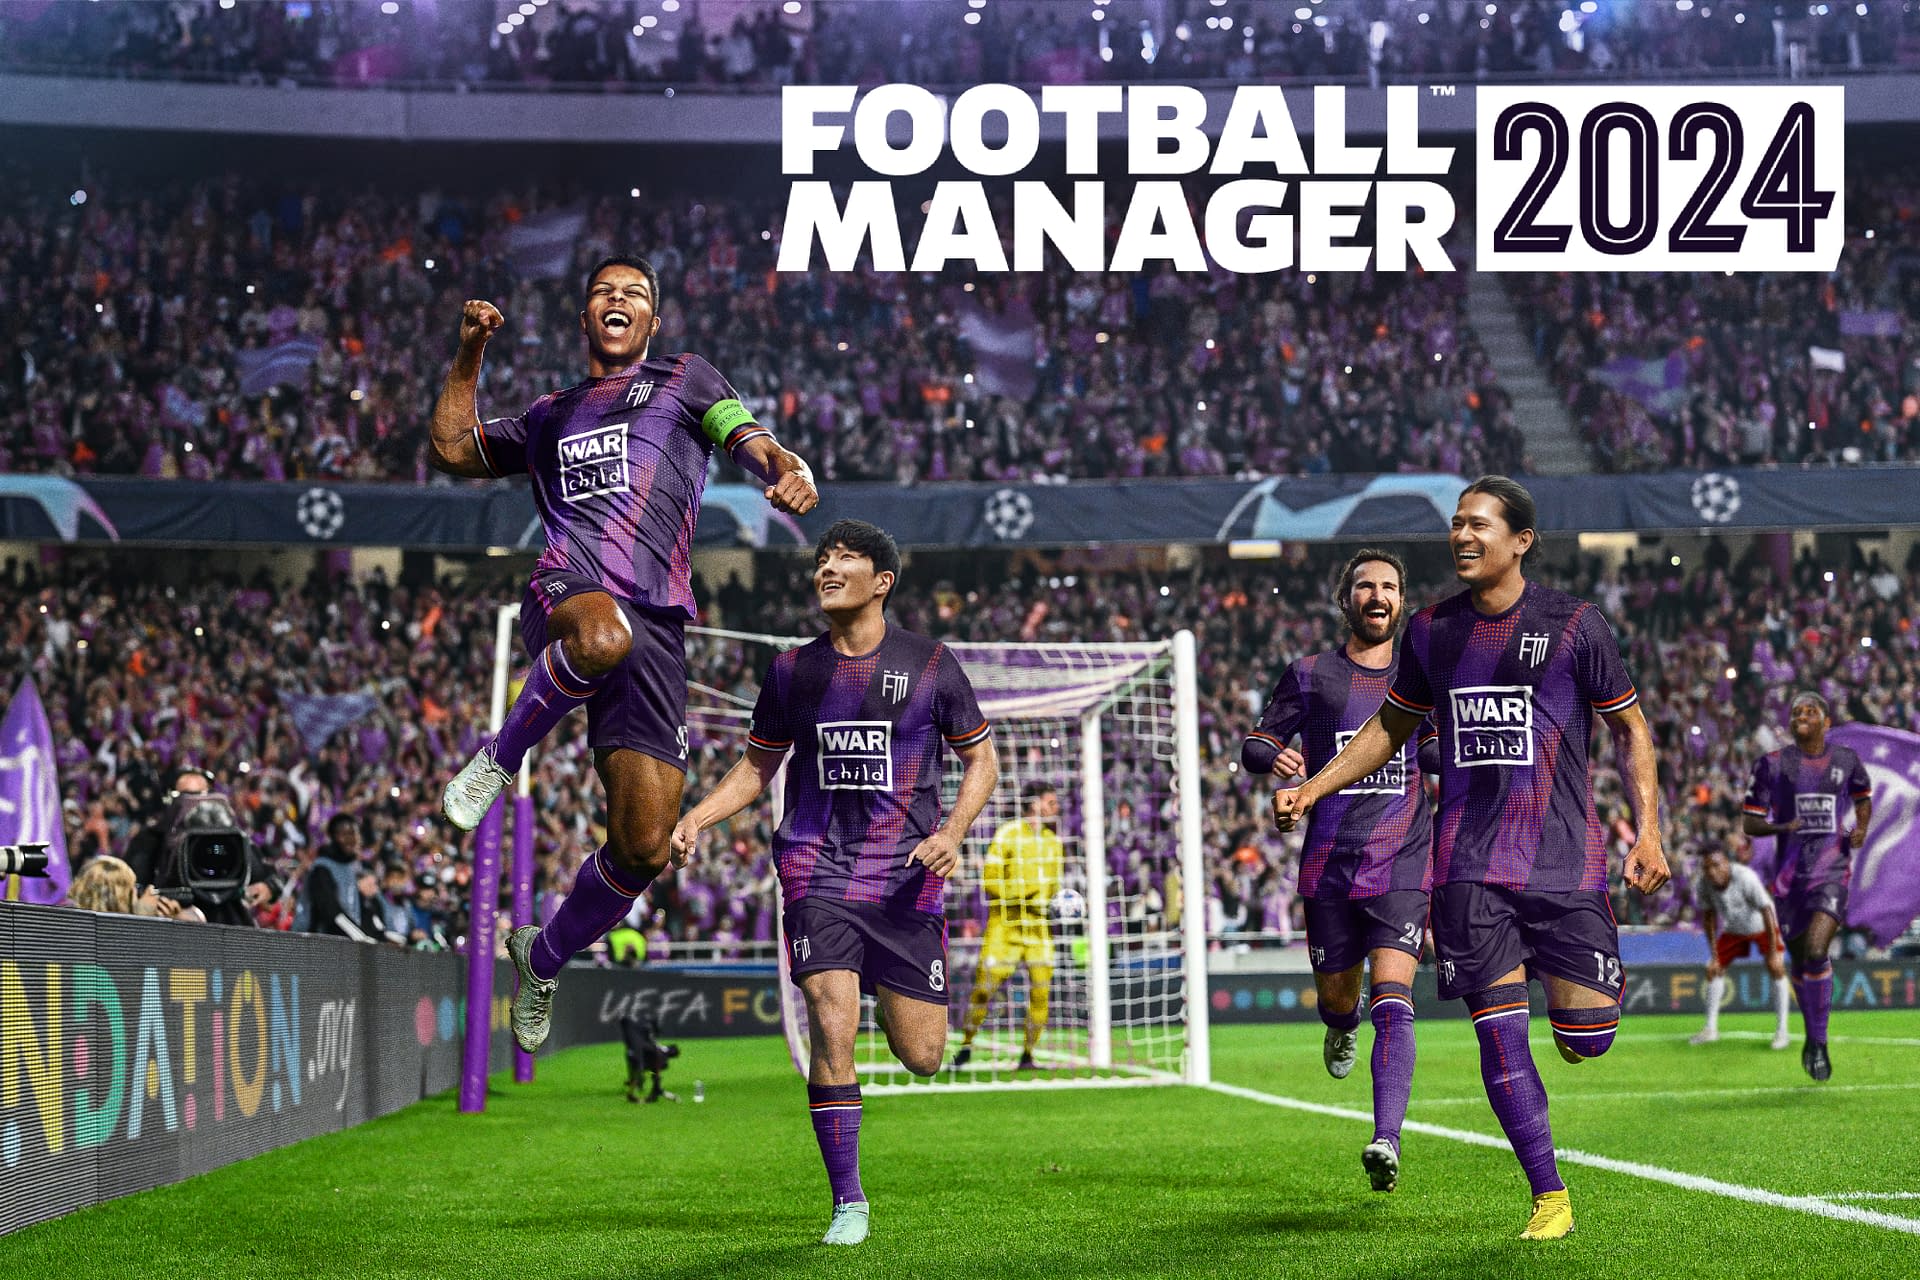 Football Manager 2021 Touch – Apps on Google Play